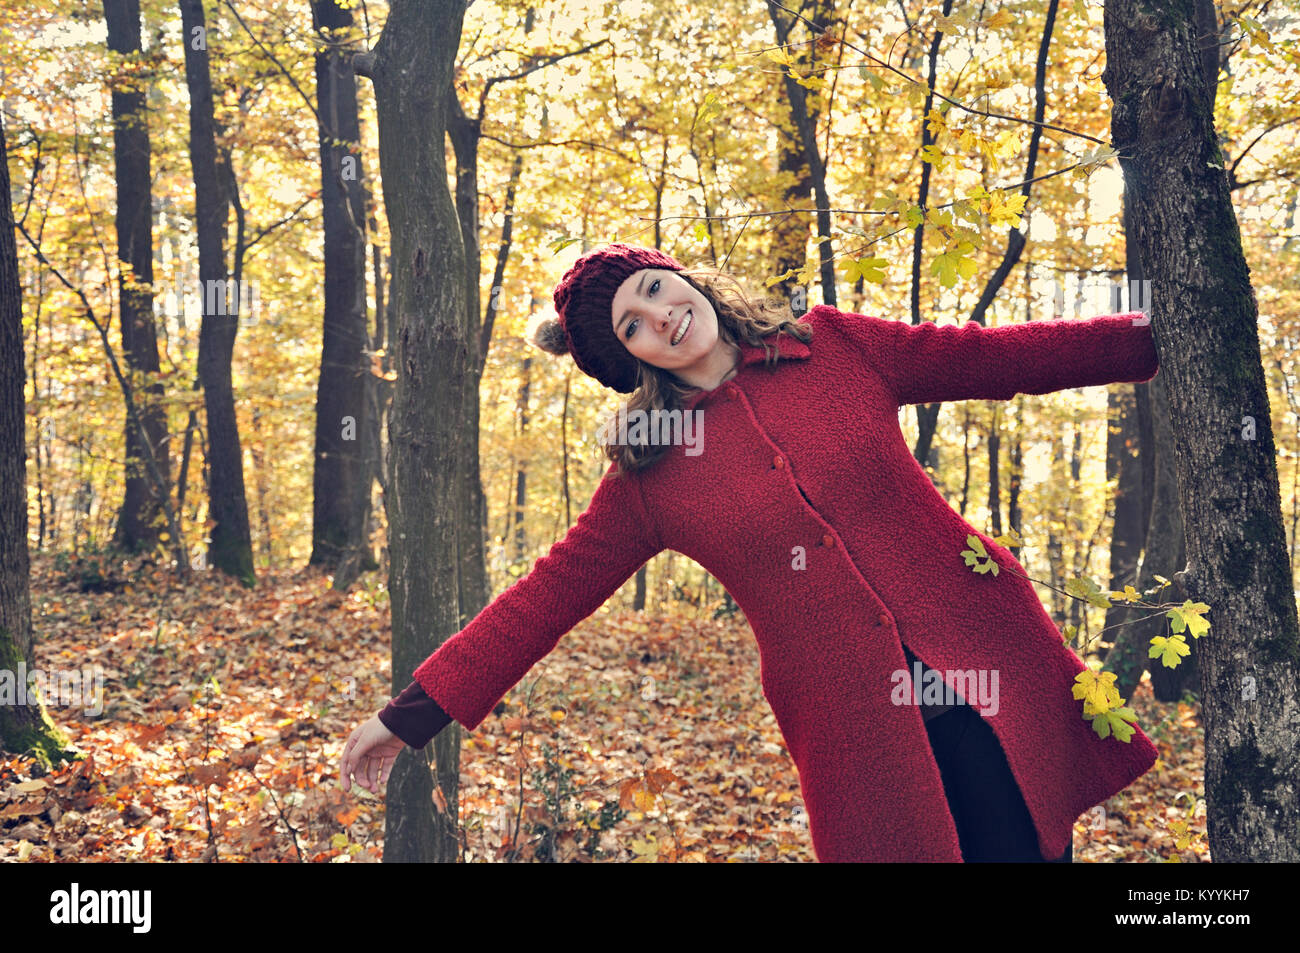 Portrait of happy young woman outdoors in forest Stock Photo